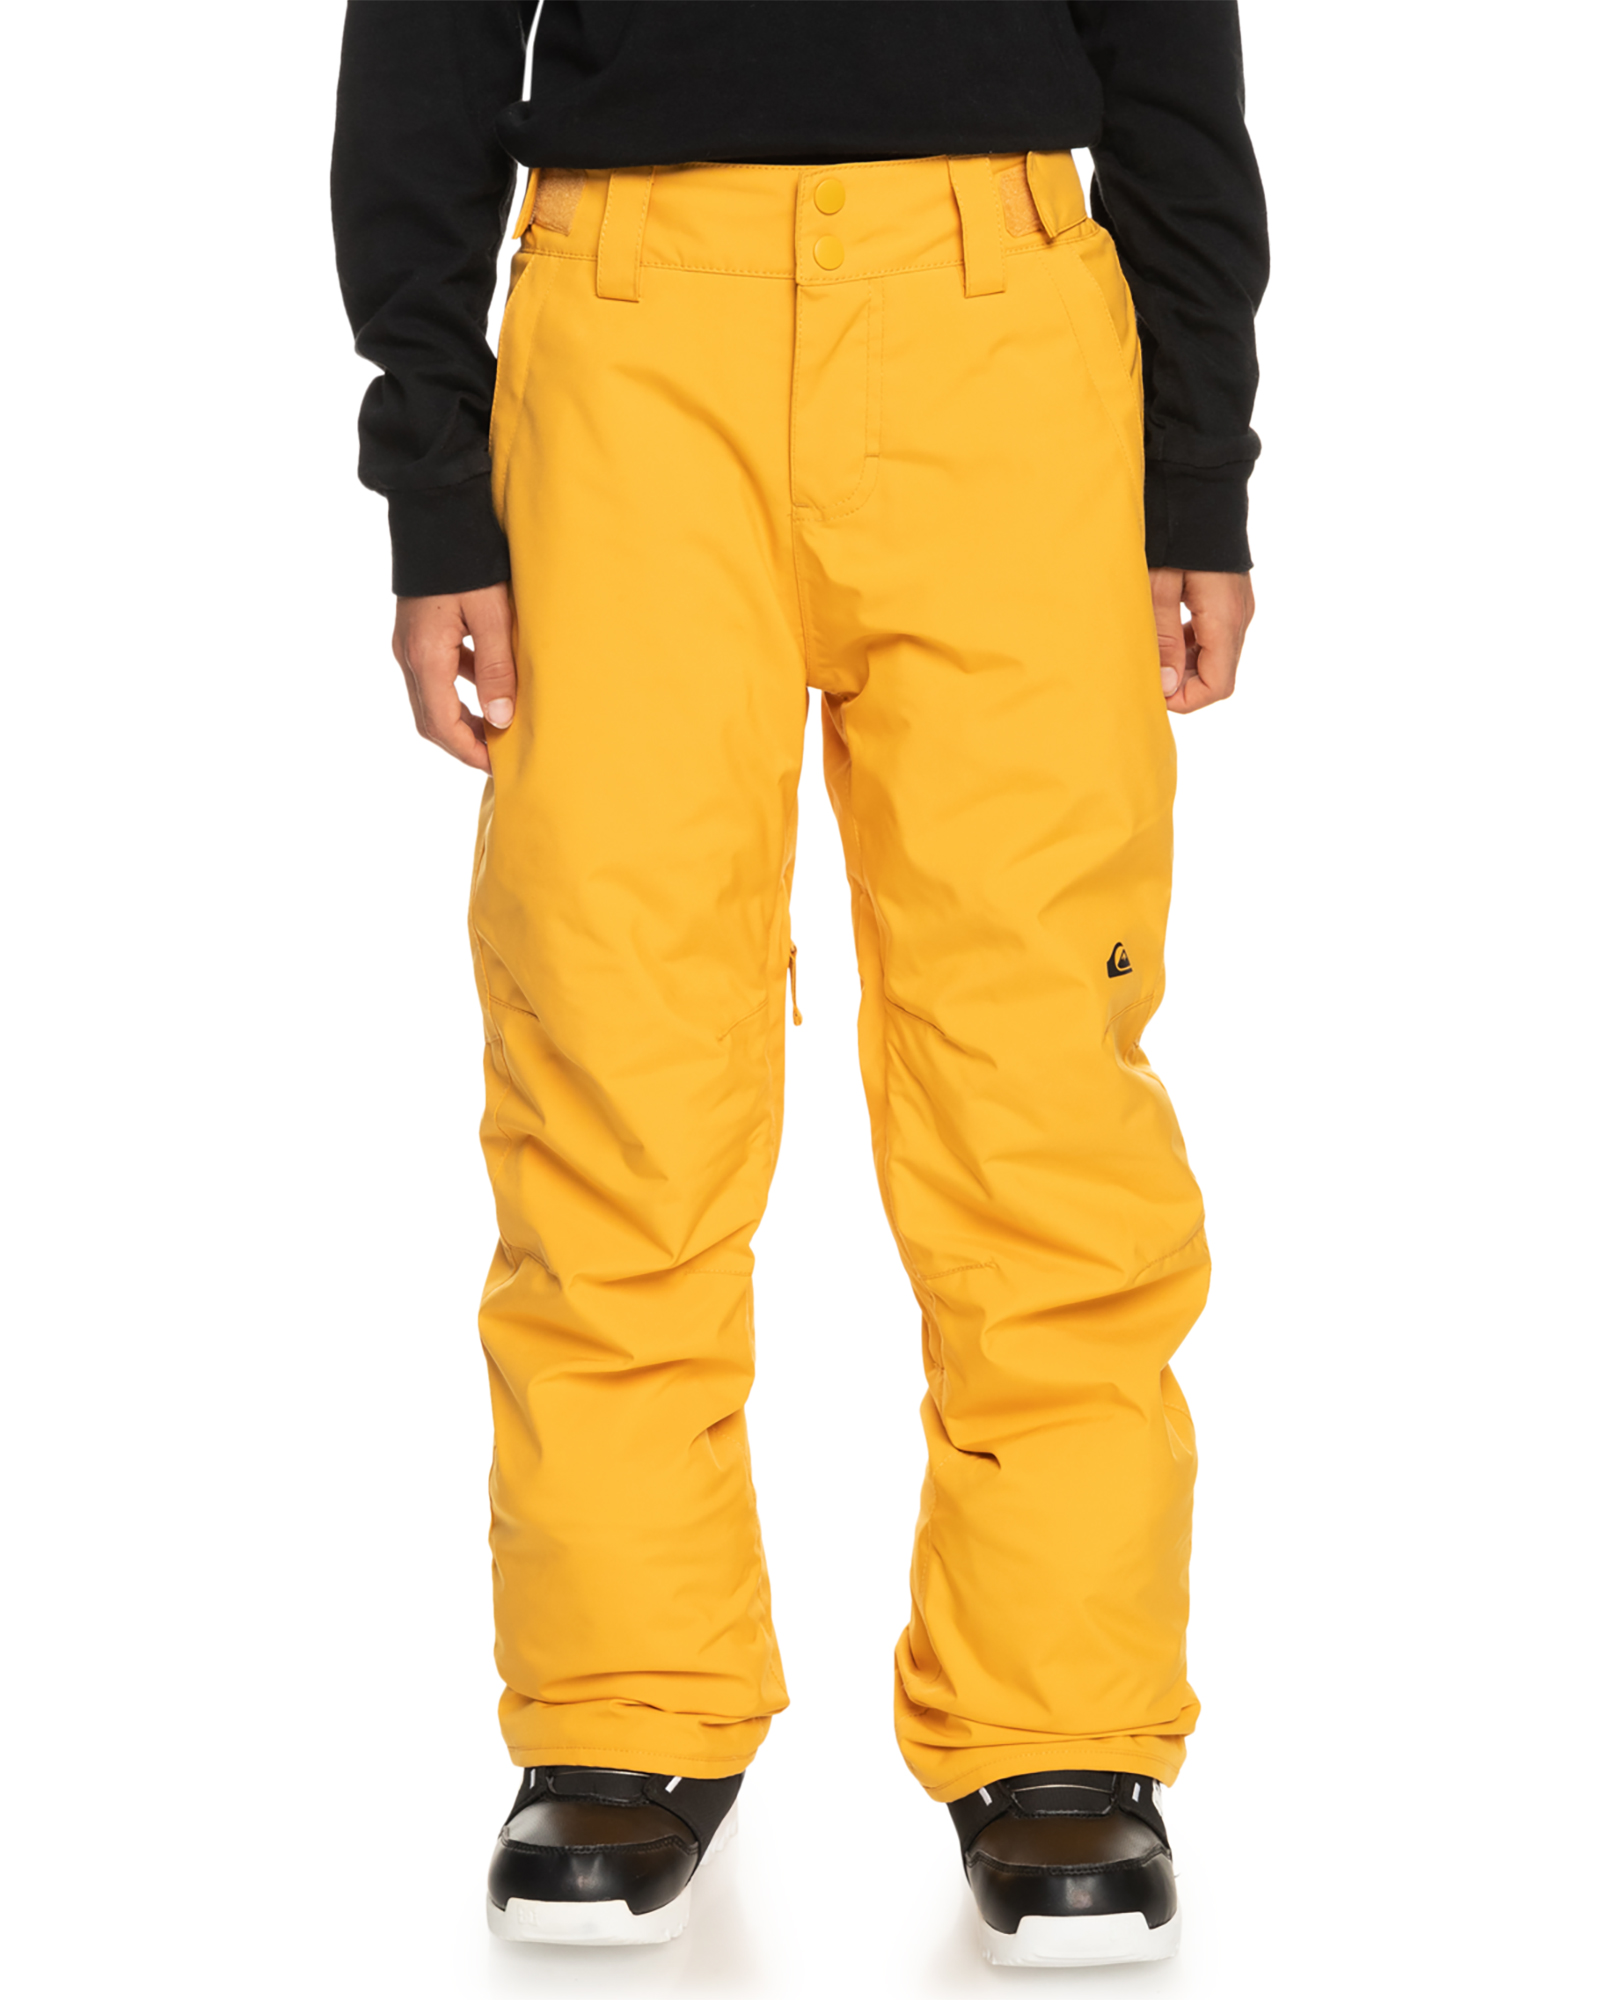 Quiksilver Estate Boys’ Pants - Mineral Yellow 10 Years